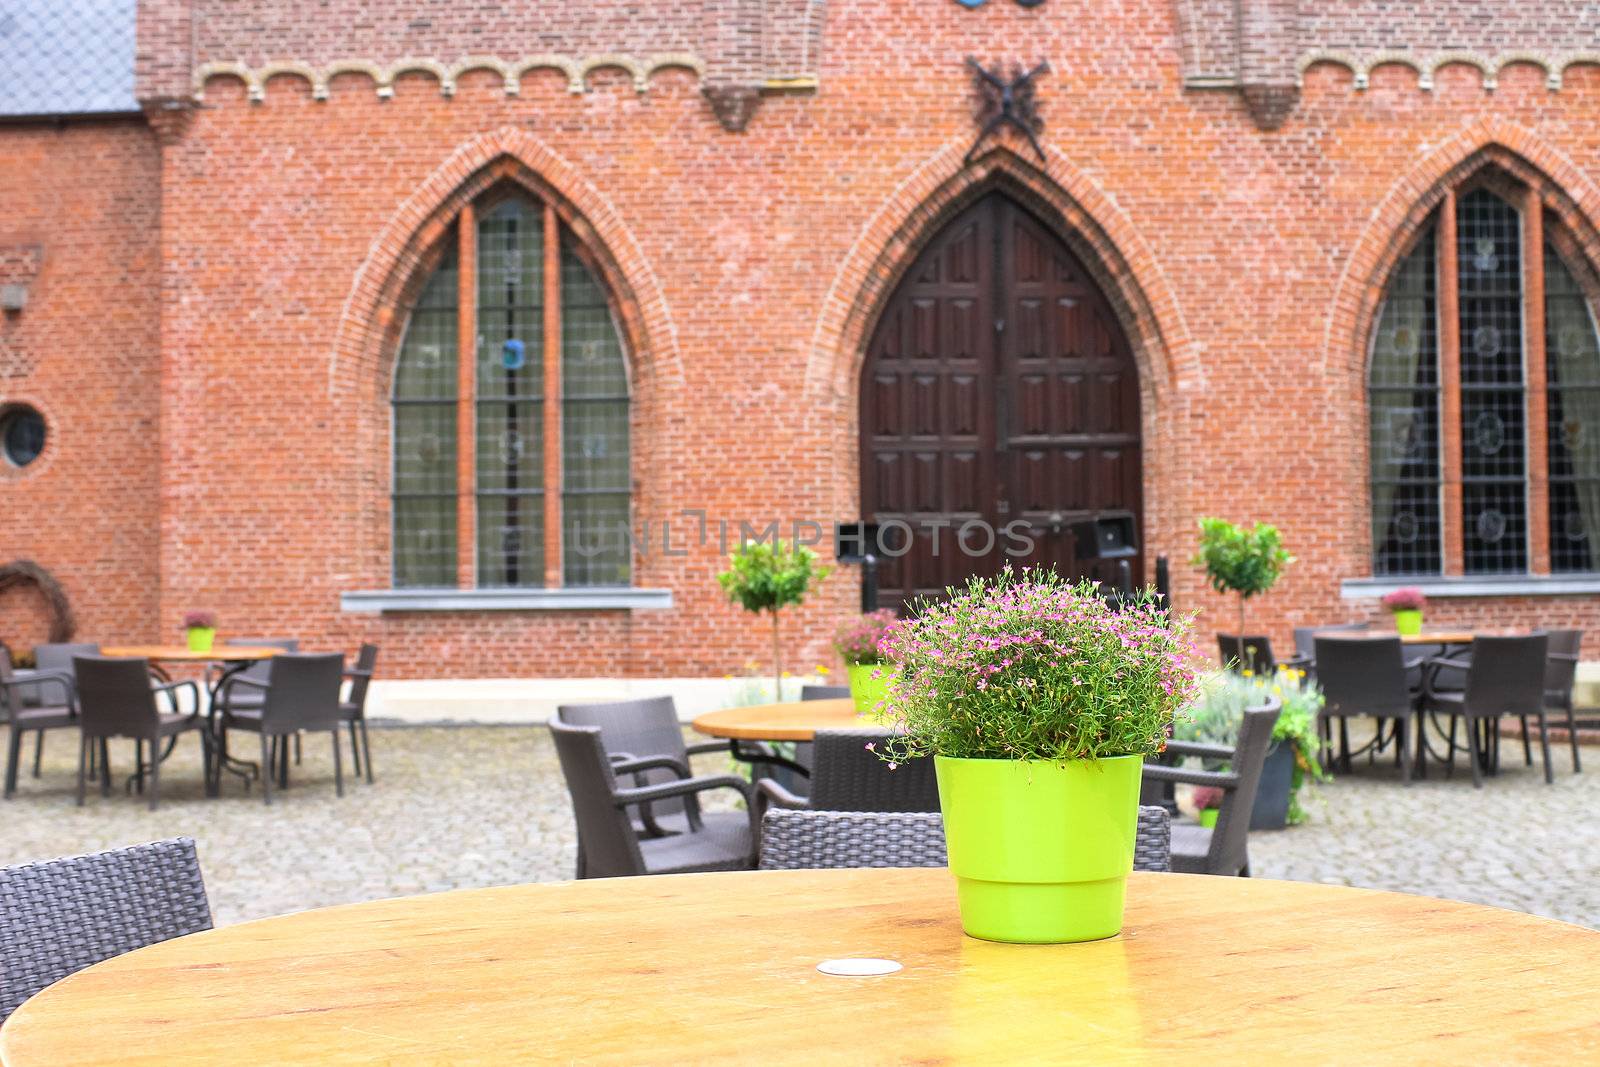 Flowers on the tables cafe in the castle Heeswijk. Netherlands by NickNick